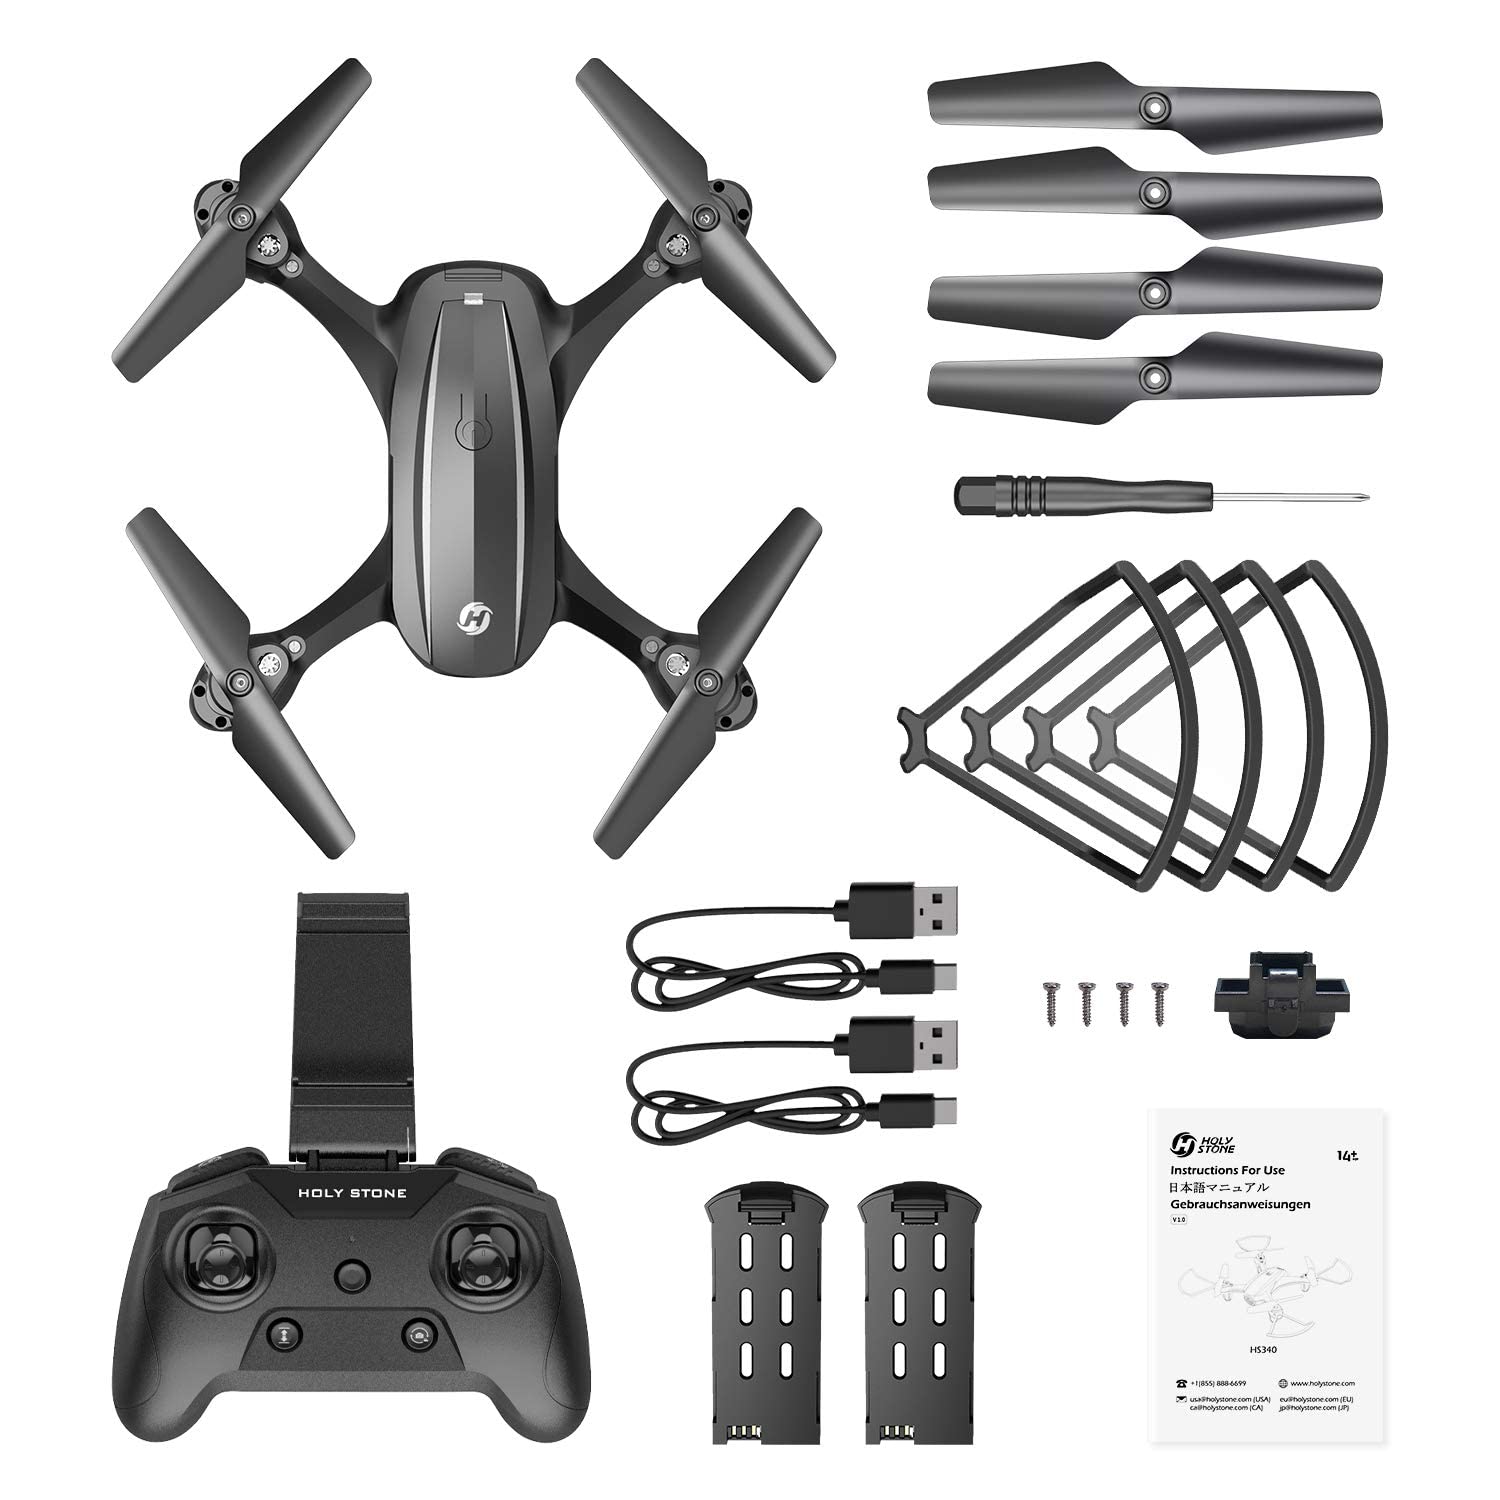 Holy Stone HS340 Mini FPV Drones with Camera for Kids 8-12 RC Quadcopter for Adults Beginners with One Key Take Off/ Landing, Gravity Sensor, Headless Mode, Waypoint Fly, Throw to Go, Indoor & Outdoor